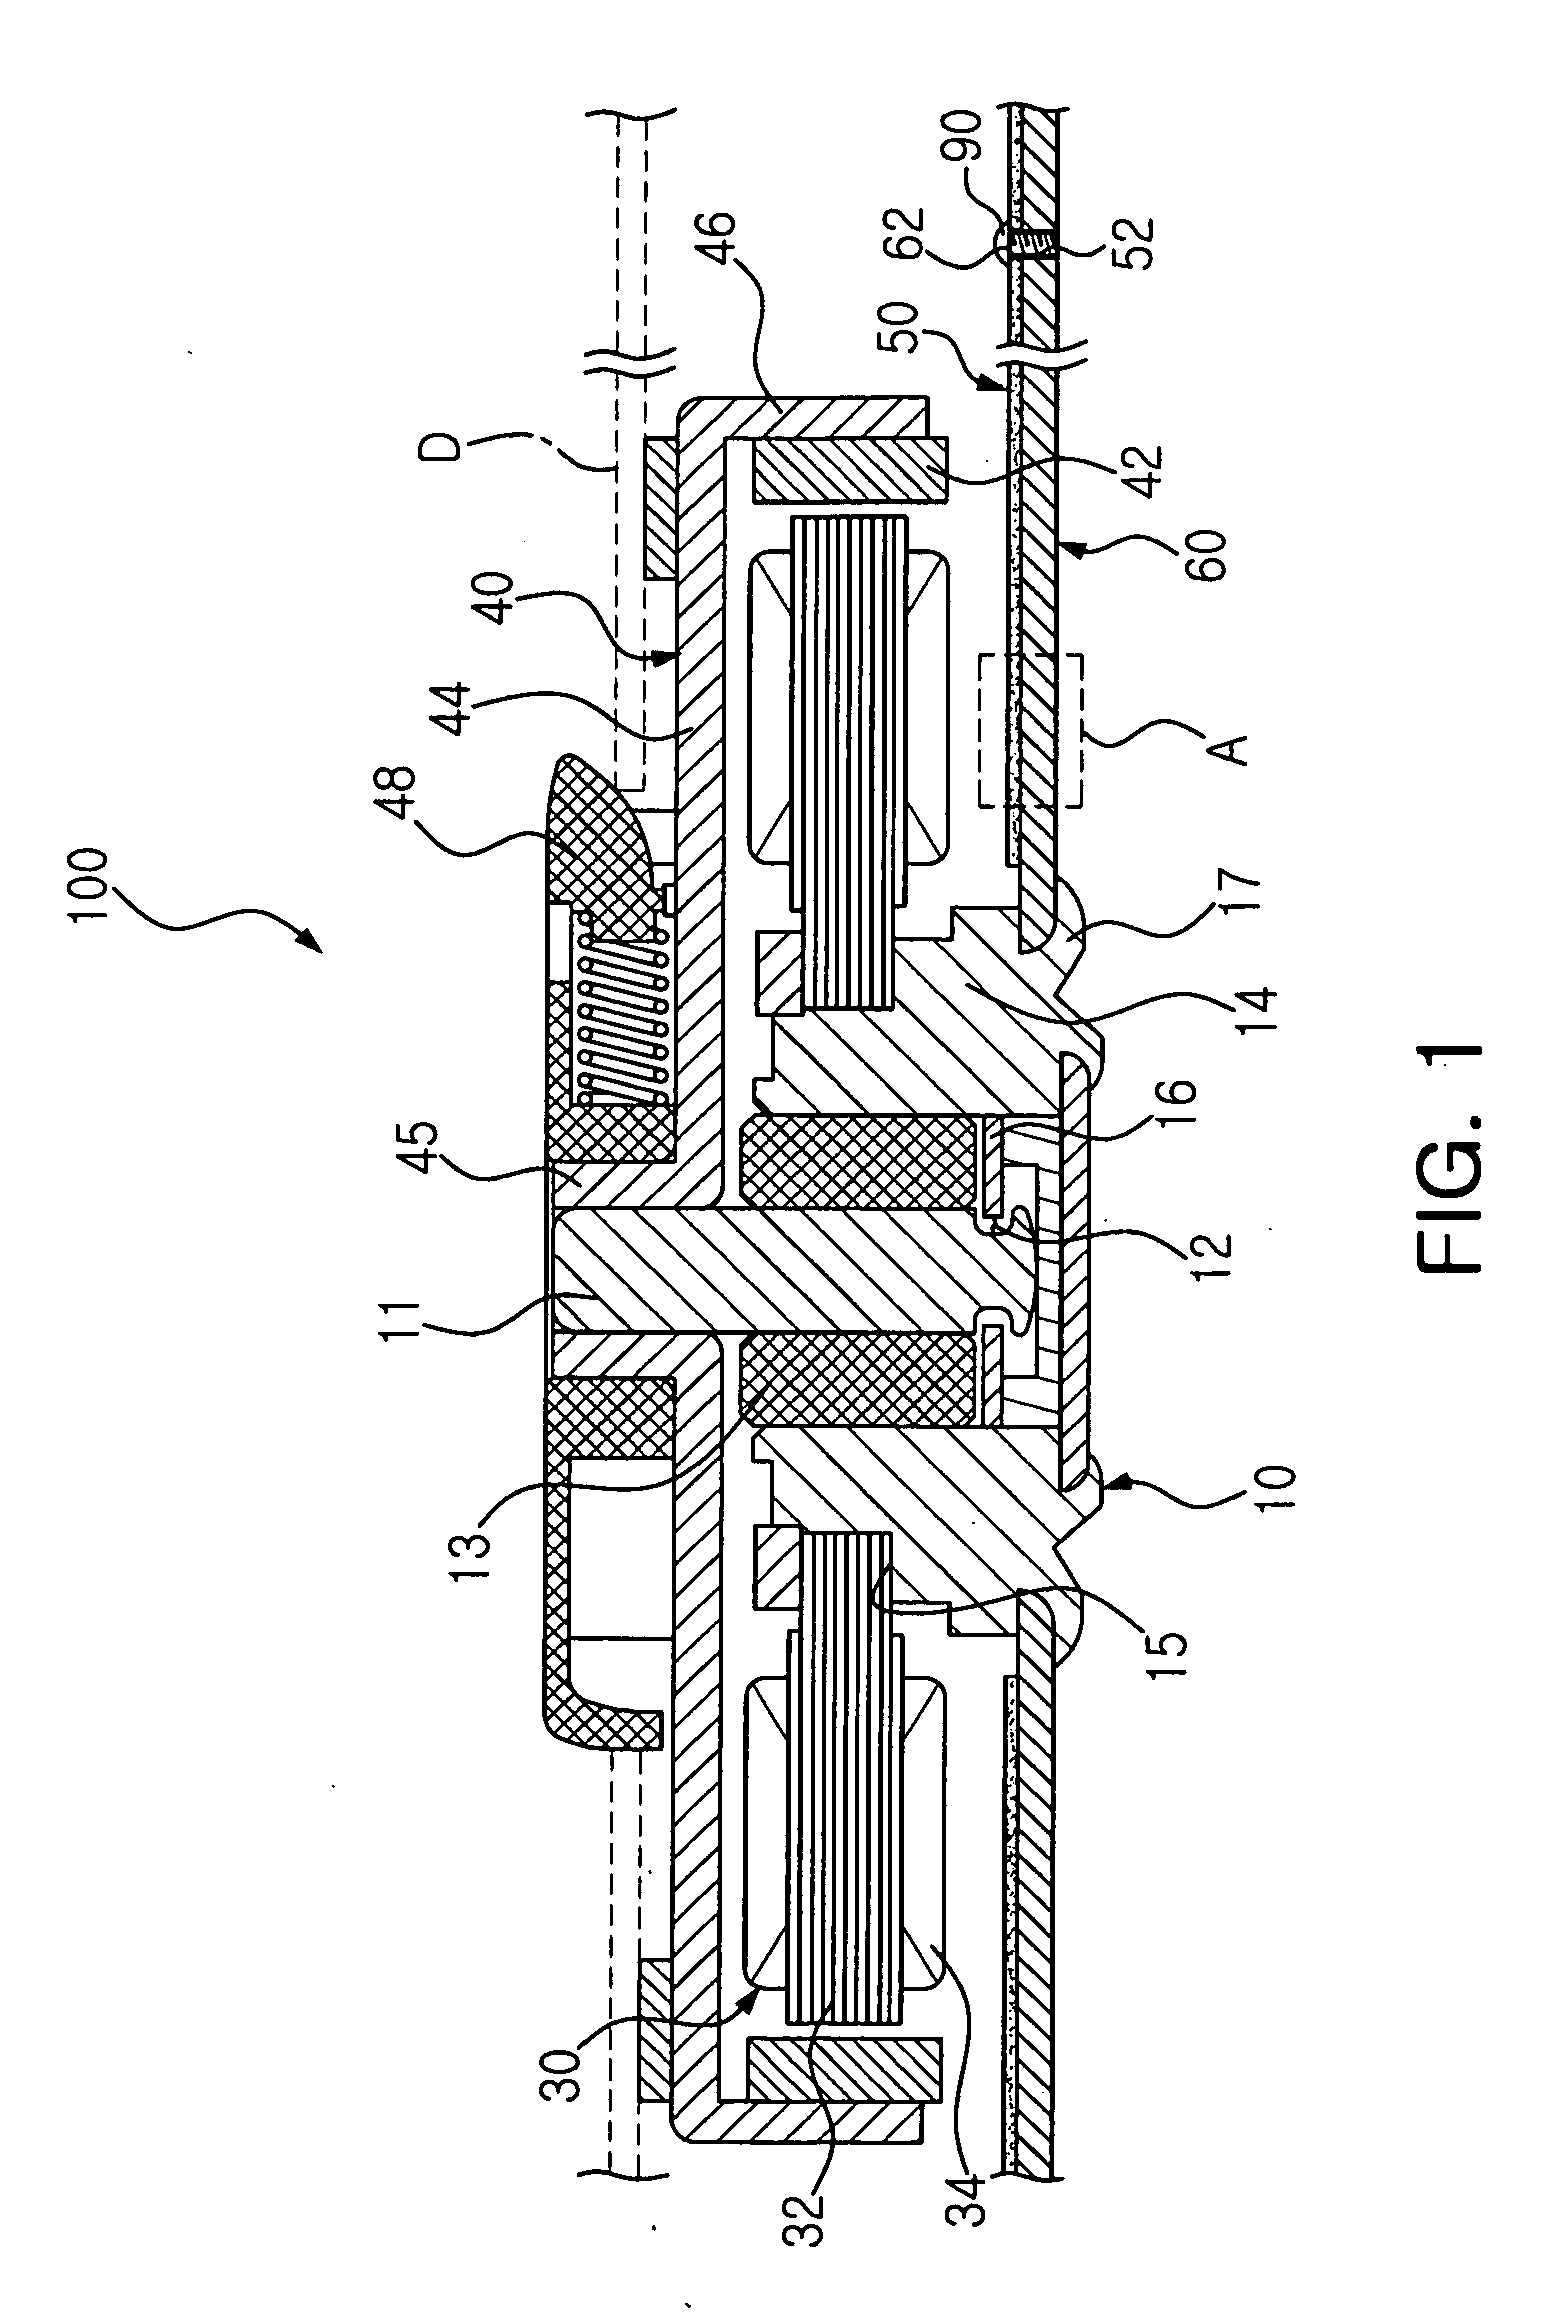 Motor and optical disc drive using the same